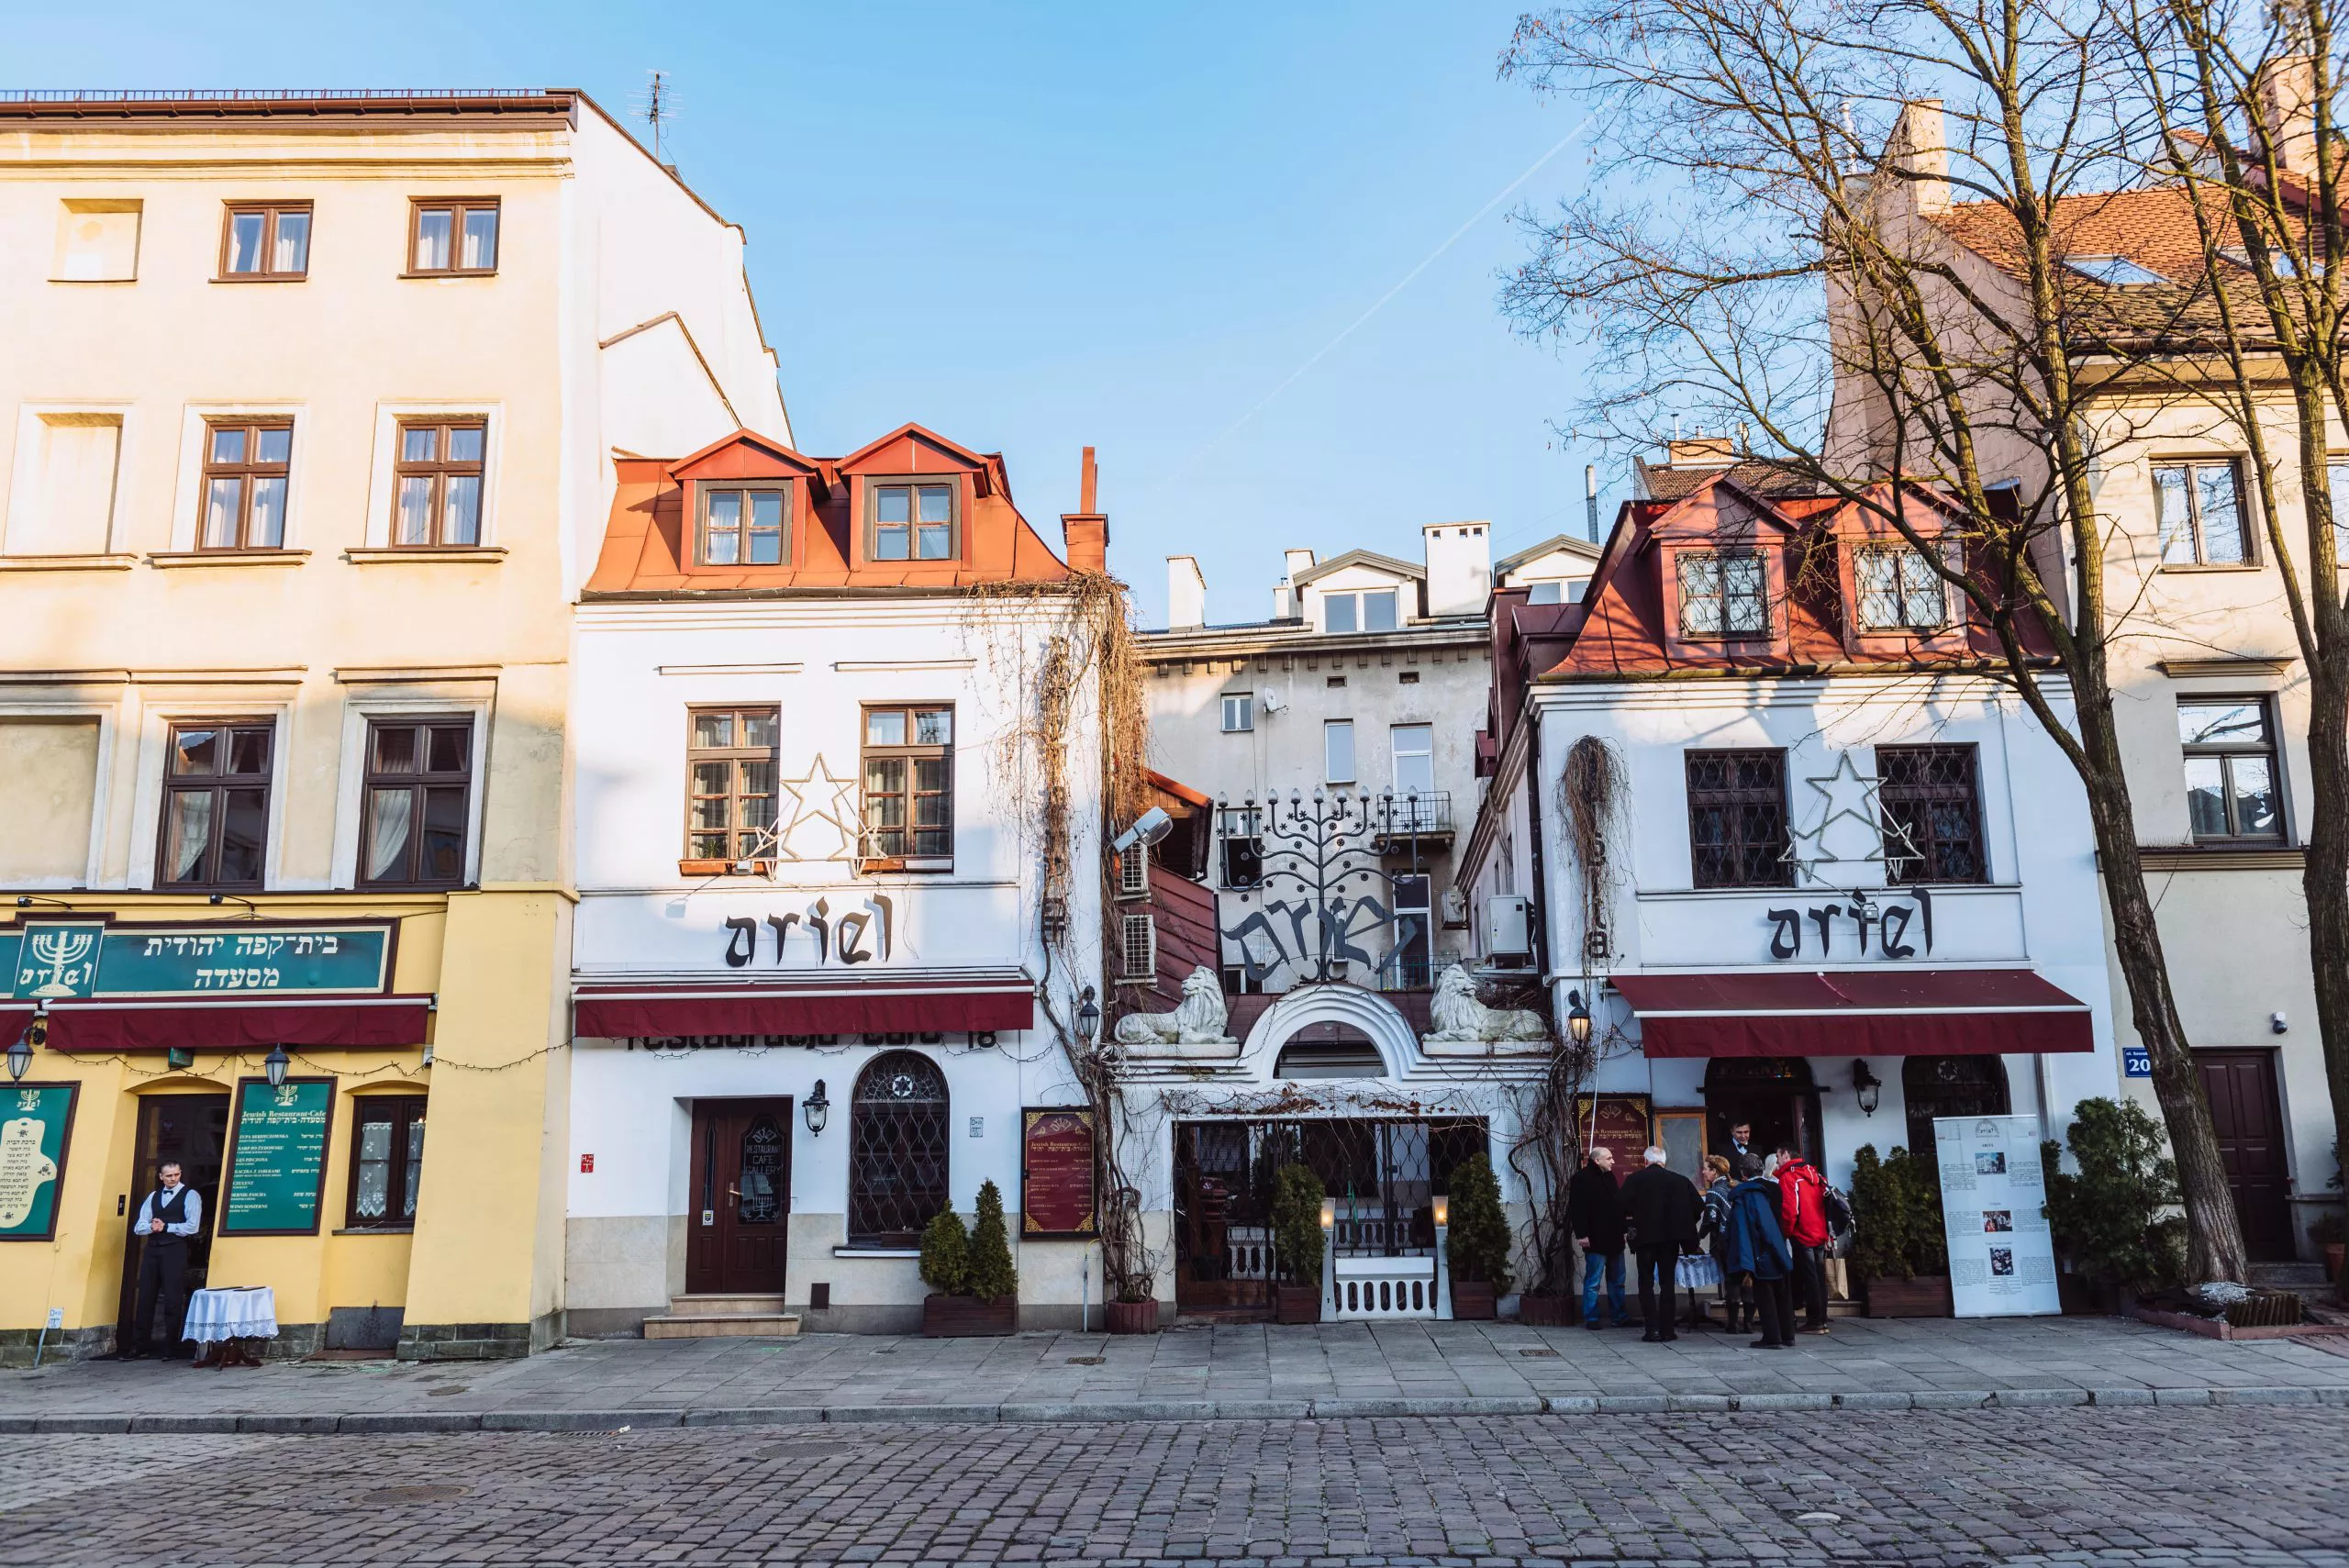 Two almost identical small three-storied white buildings with red roofs flank a low gate of masonry topped by two white lions, huddling between two taller buildings. The name “Ariel” displayed on all the three central structures is that of a popular Kazimierz restaurant. A group of tourists standing outside on the pavement under a tall leafless tree are greeted in its door by a waiter.